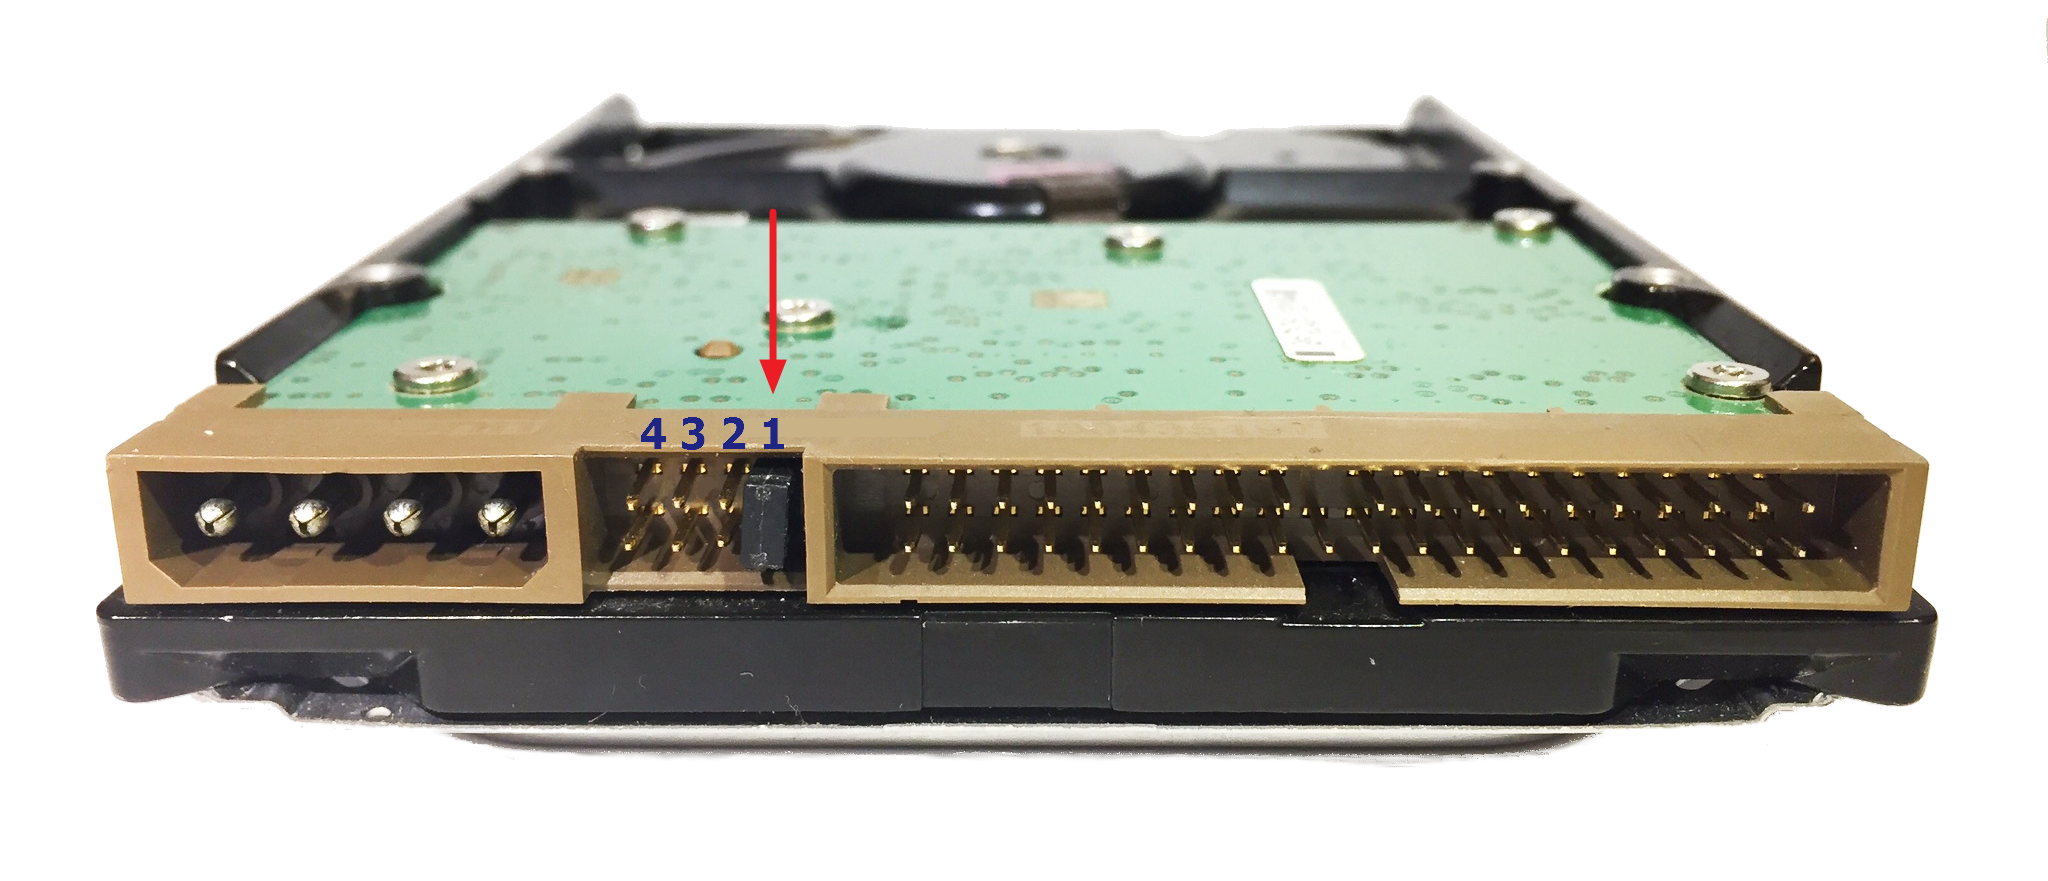 larynx snap Assault Connecting Seagate Drives to Serial Port